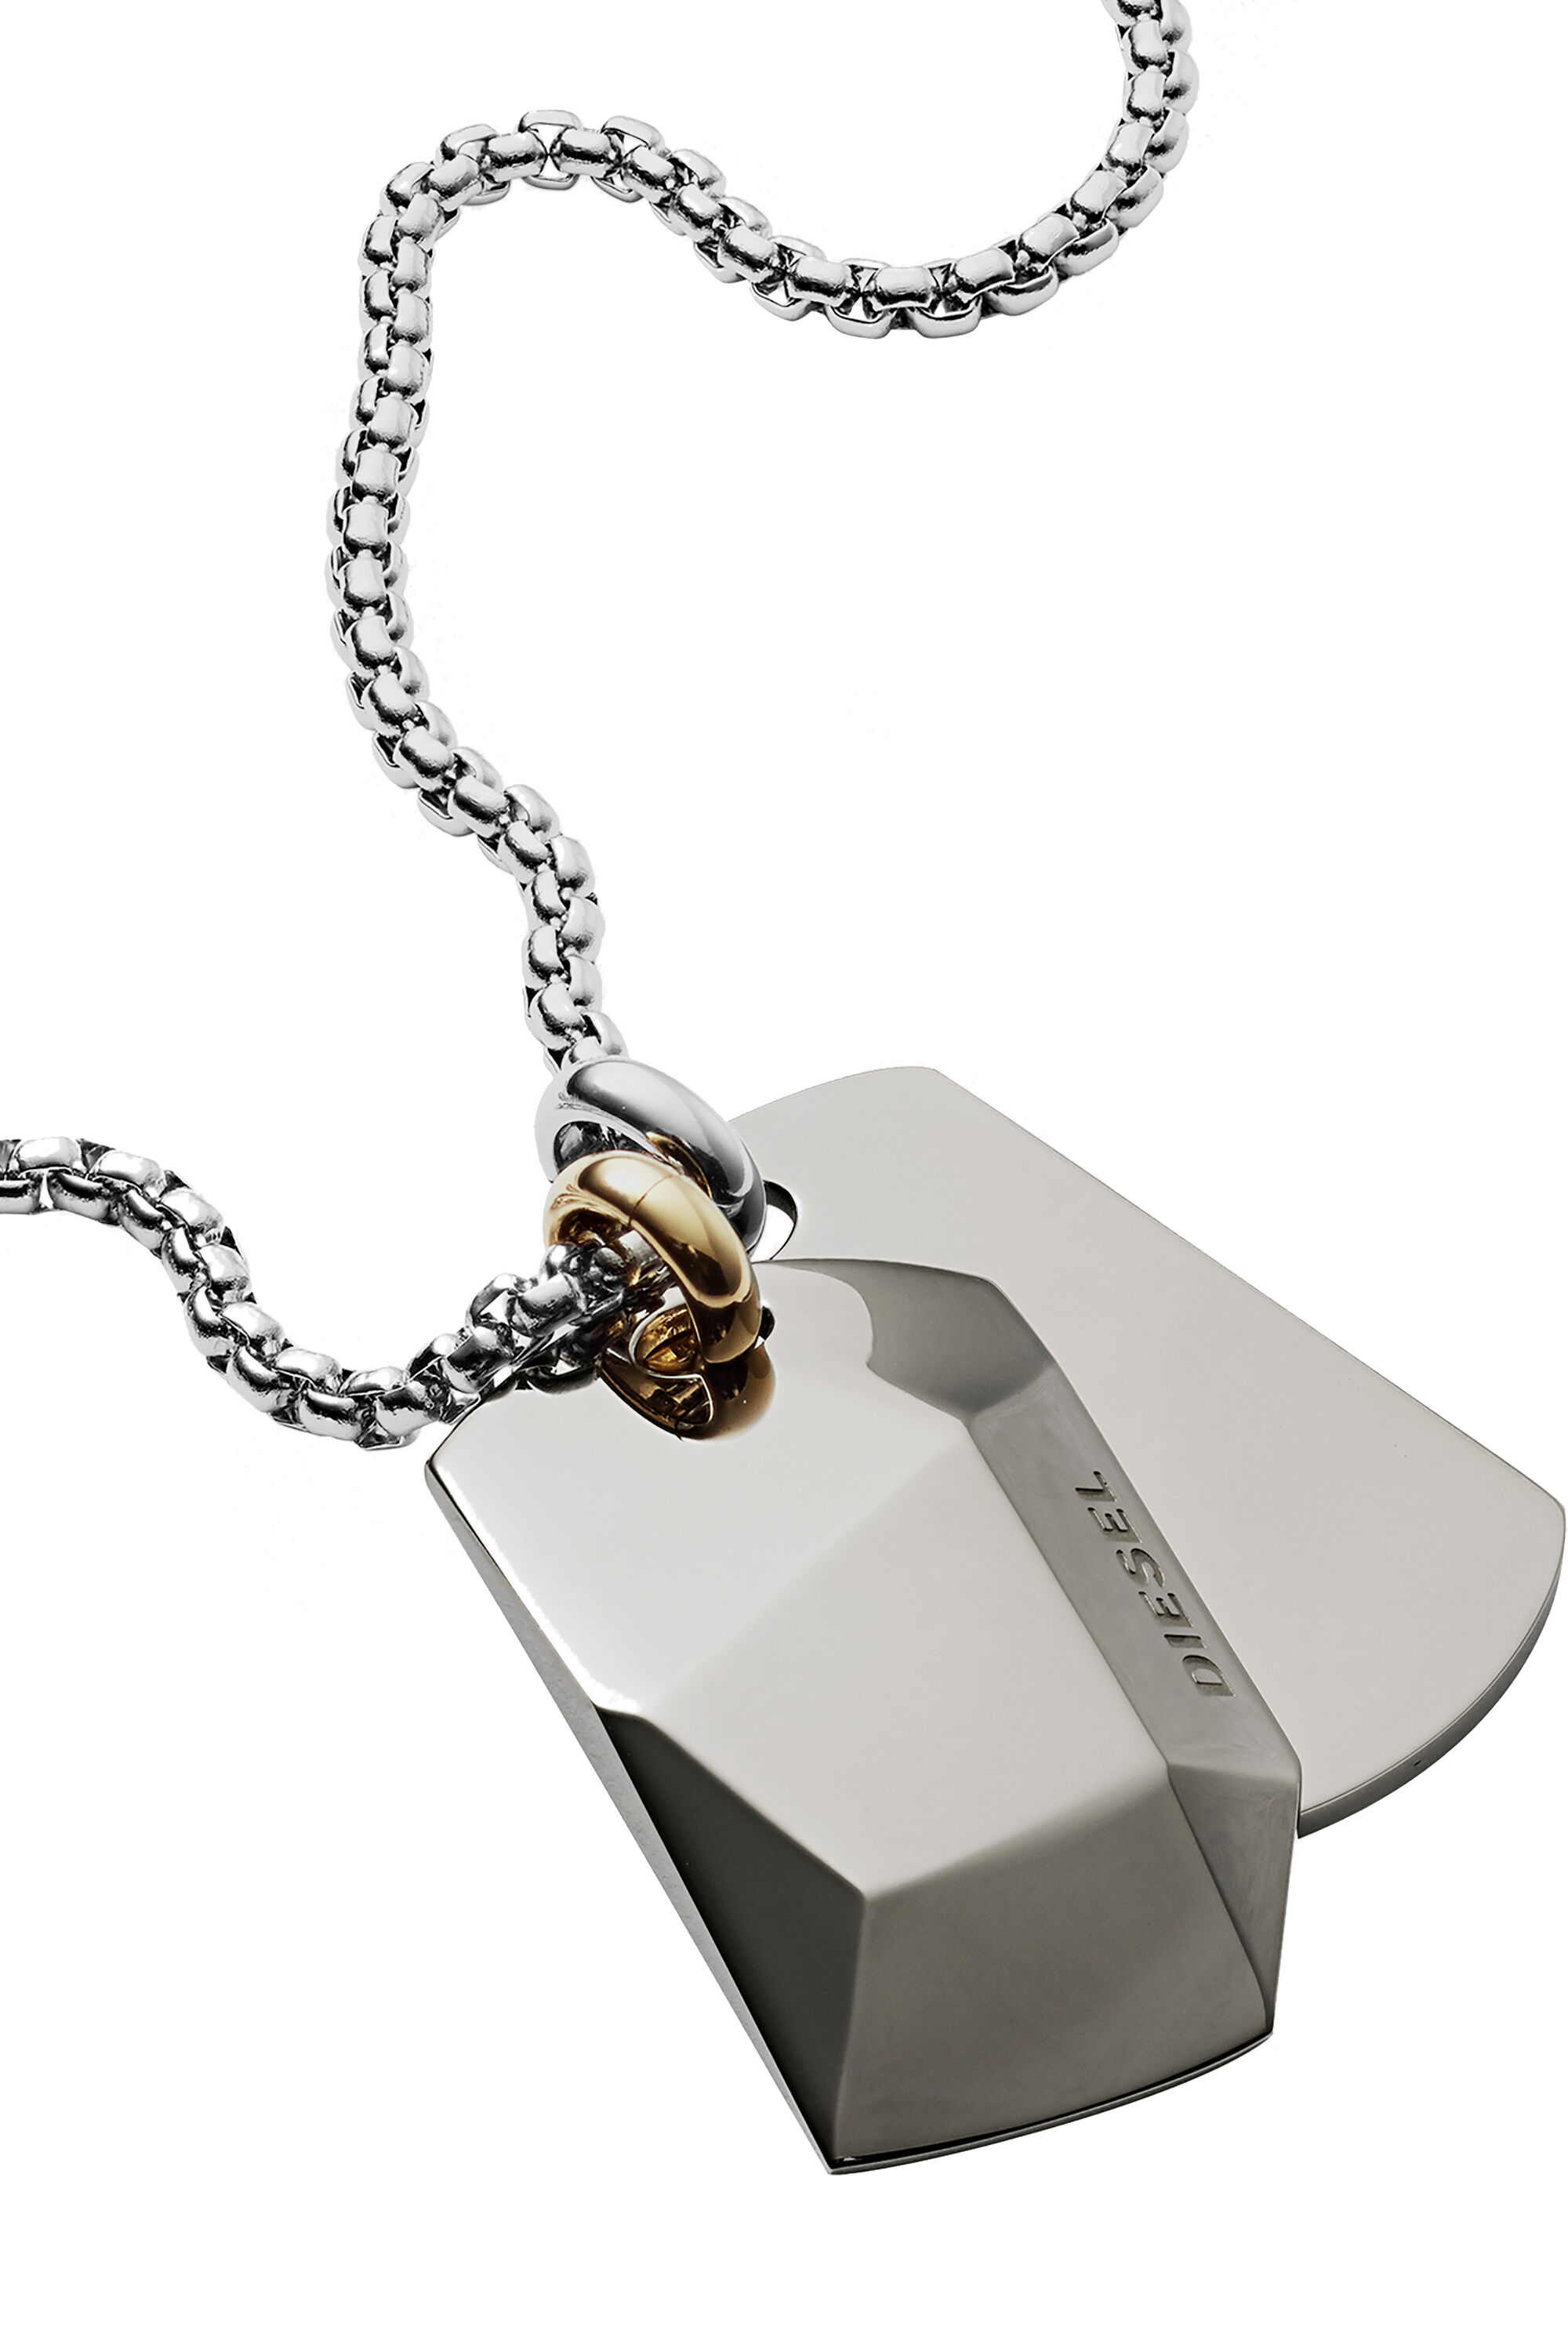 DX1143 Man: Stainless steel double dog tag necklace | Diesel